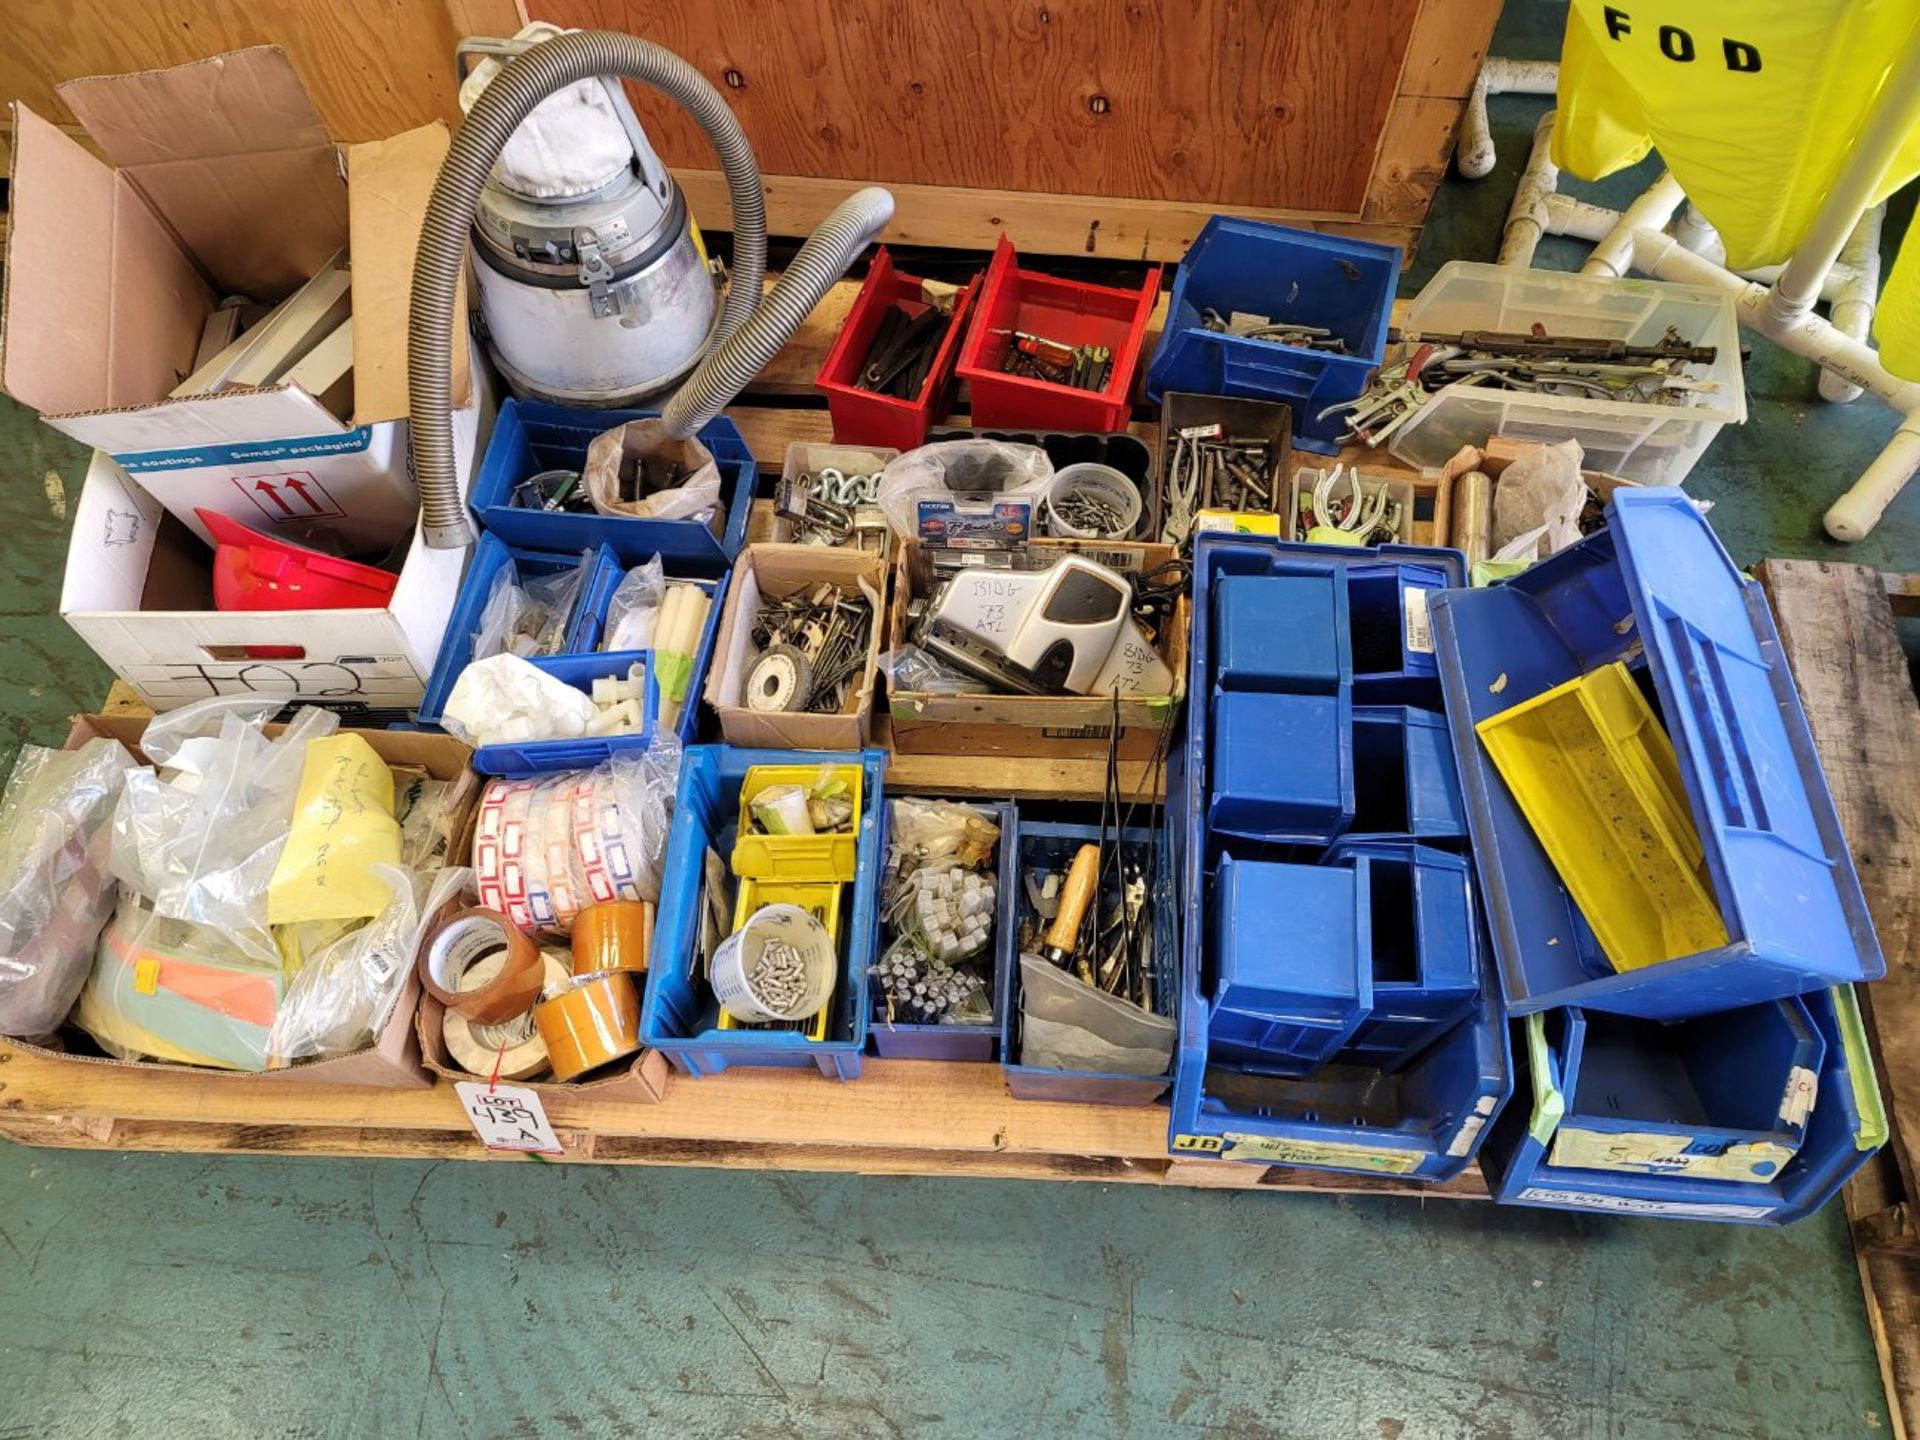 LOT - PALLET OF MISC TOOLING, SHIPPING SUPPLIES, PLASTIC PARTS BINS